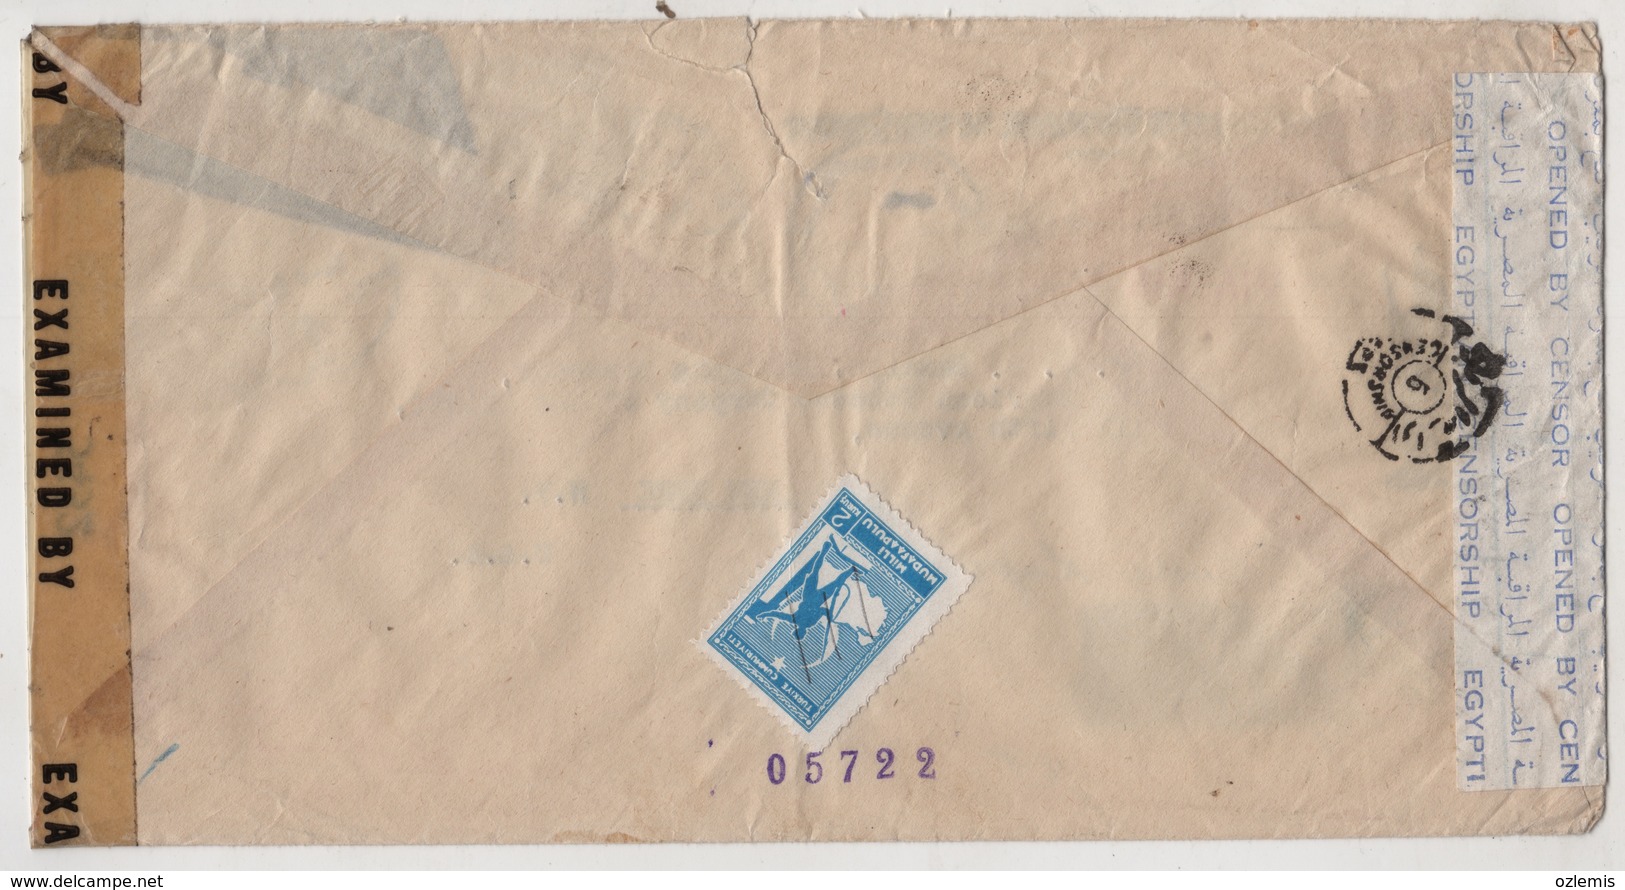 TURKEY TO USA -THE AMERICAN TOBACCO COMPANY OF THE ORIENT INCORPORATED ,EGYPTIAN CENSORSHIP 1945 - Covers & Documents